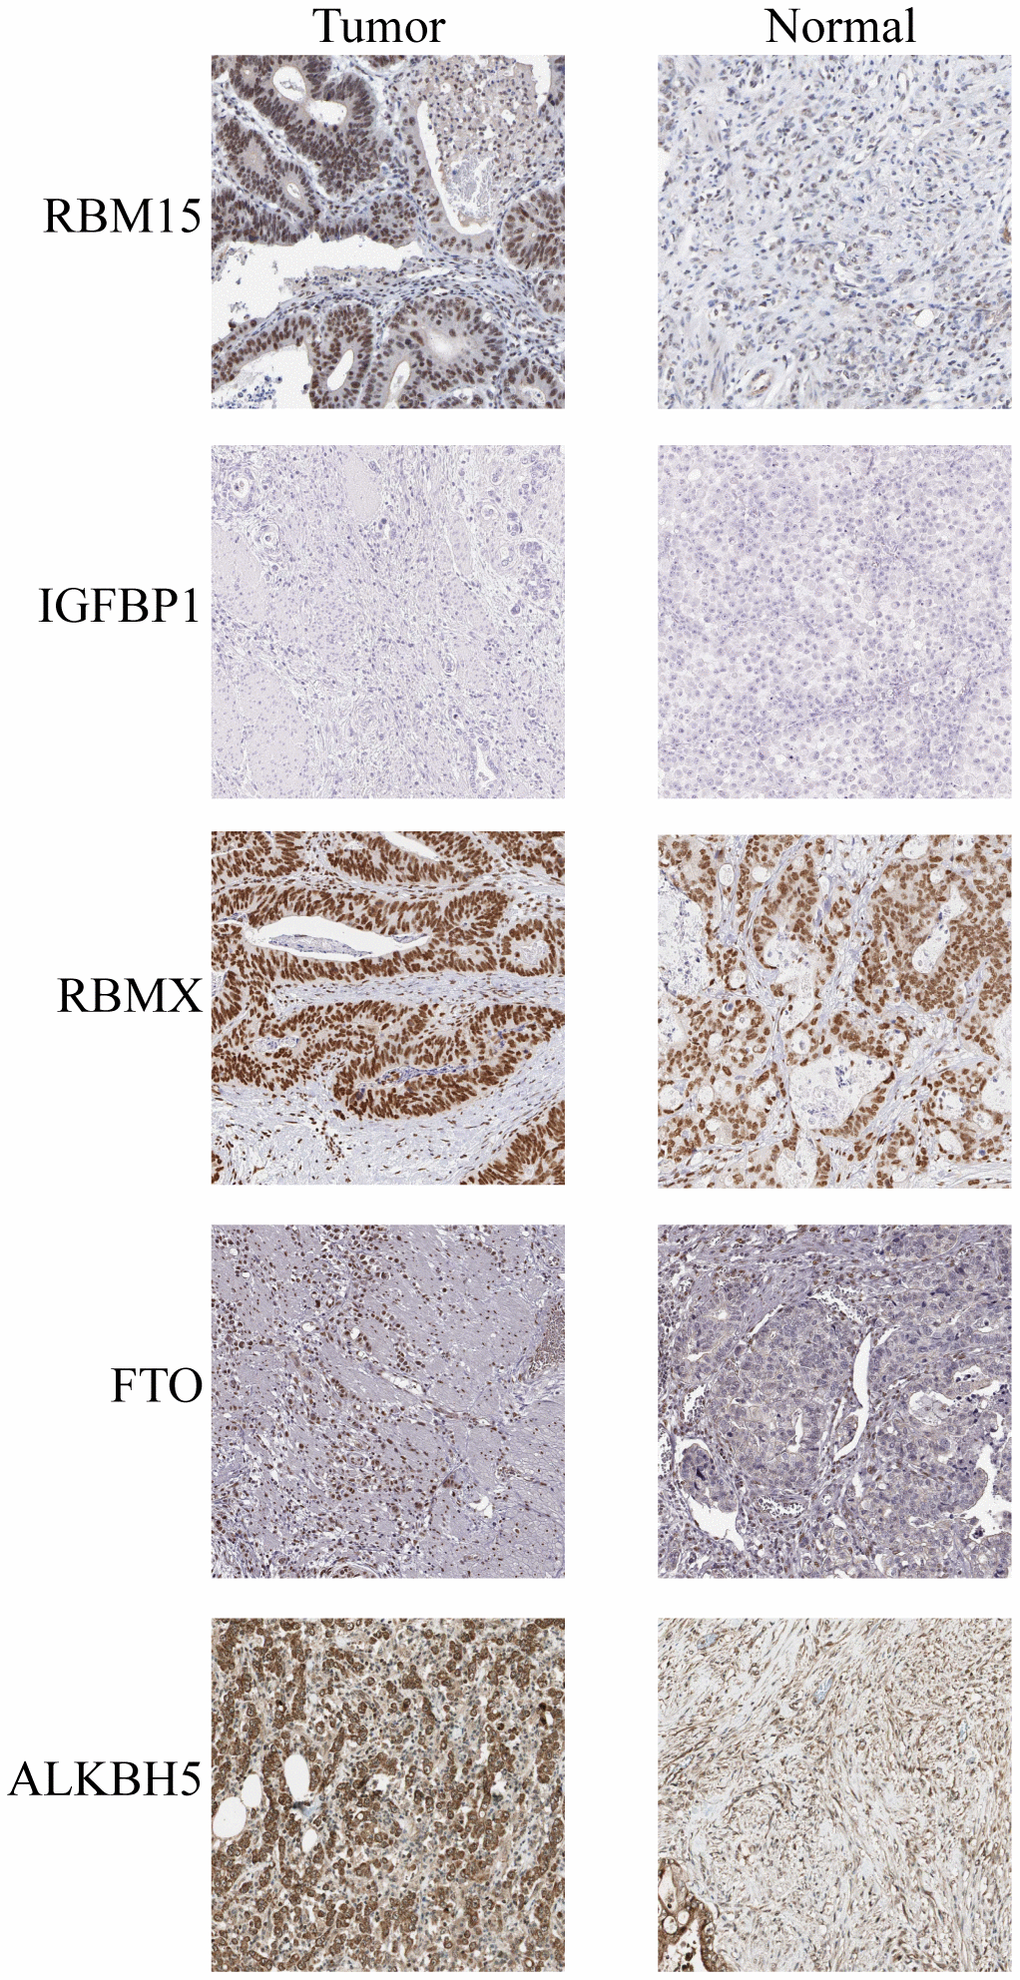 IHC analysis of five m6A modulators in stomach adenocarcinoma tissues and adjacent normal tissues.